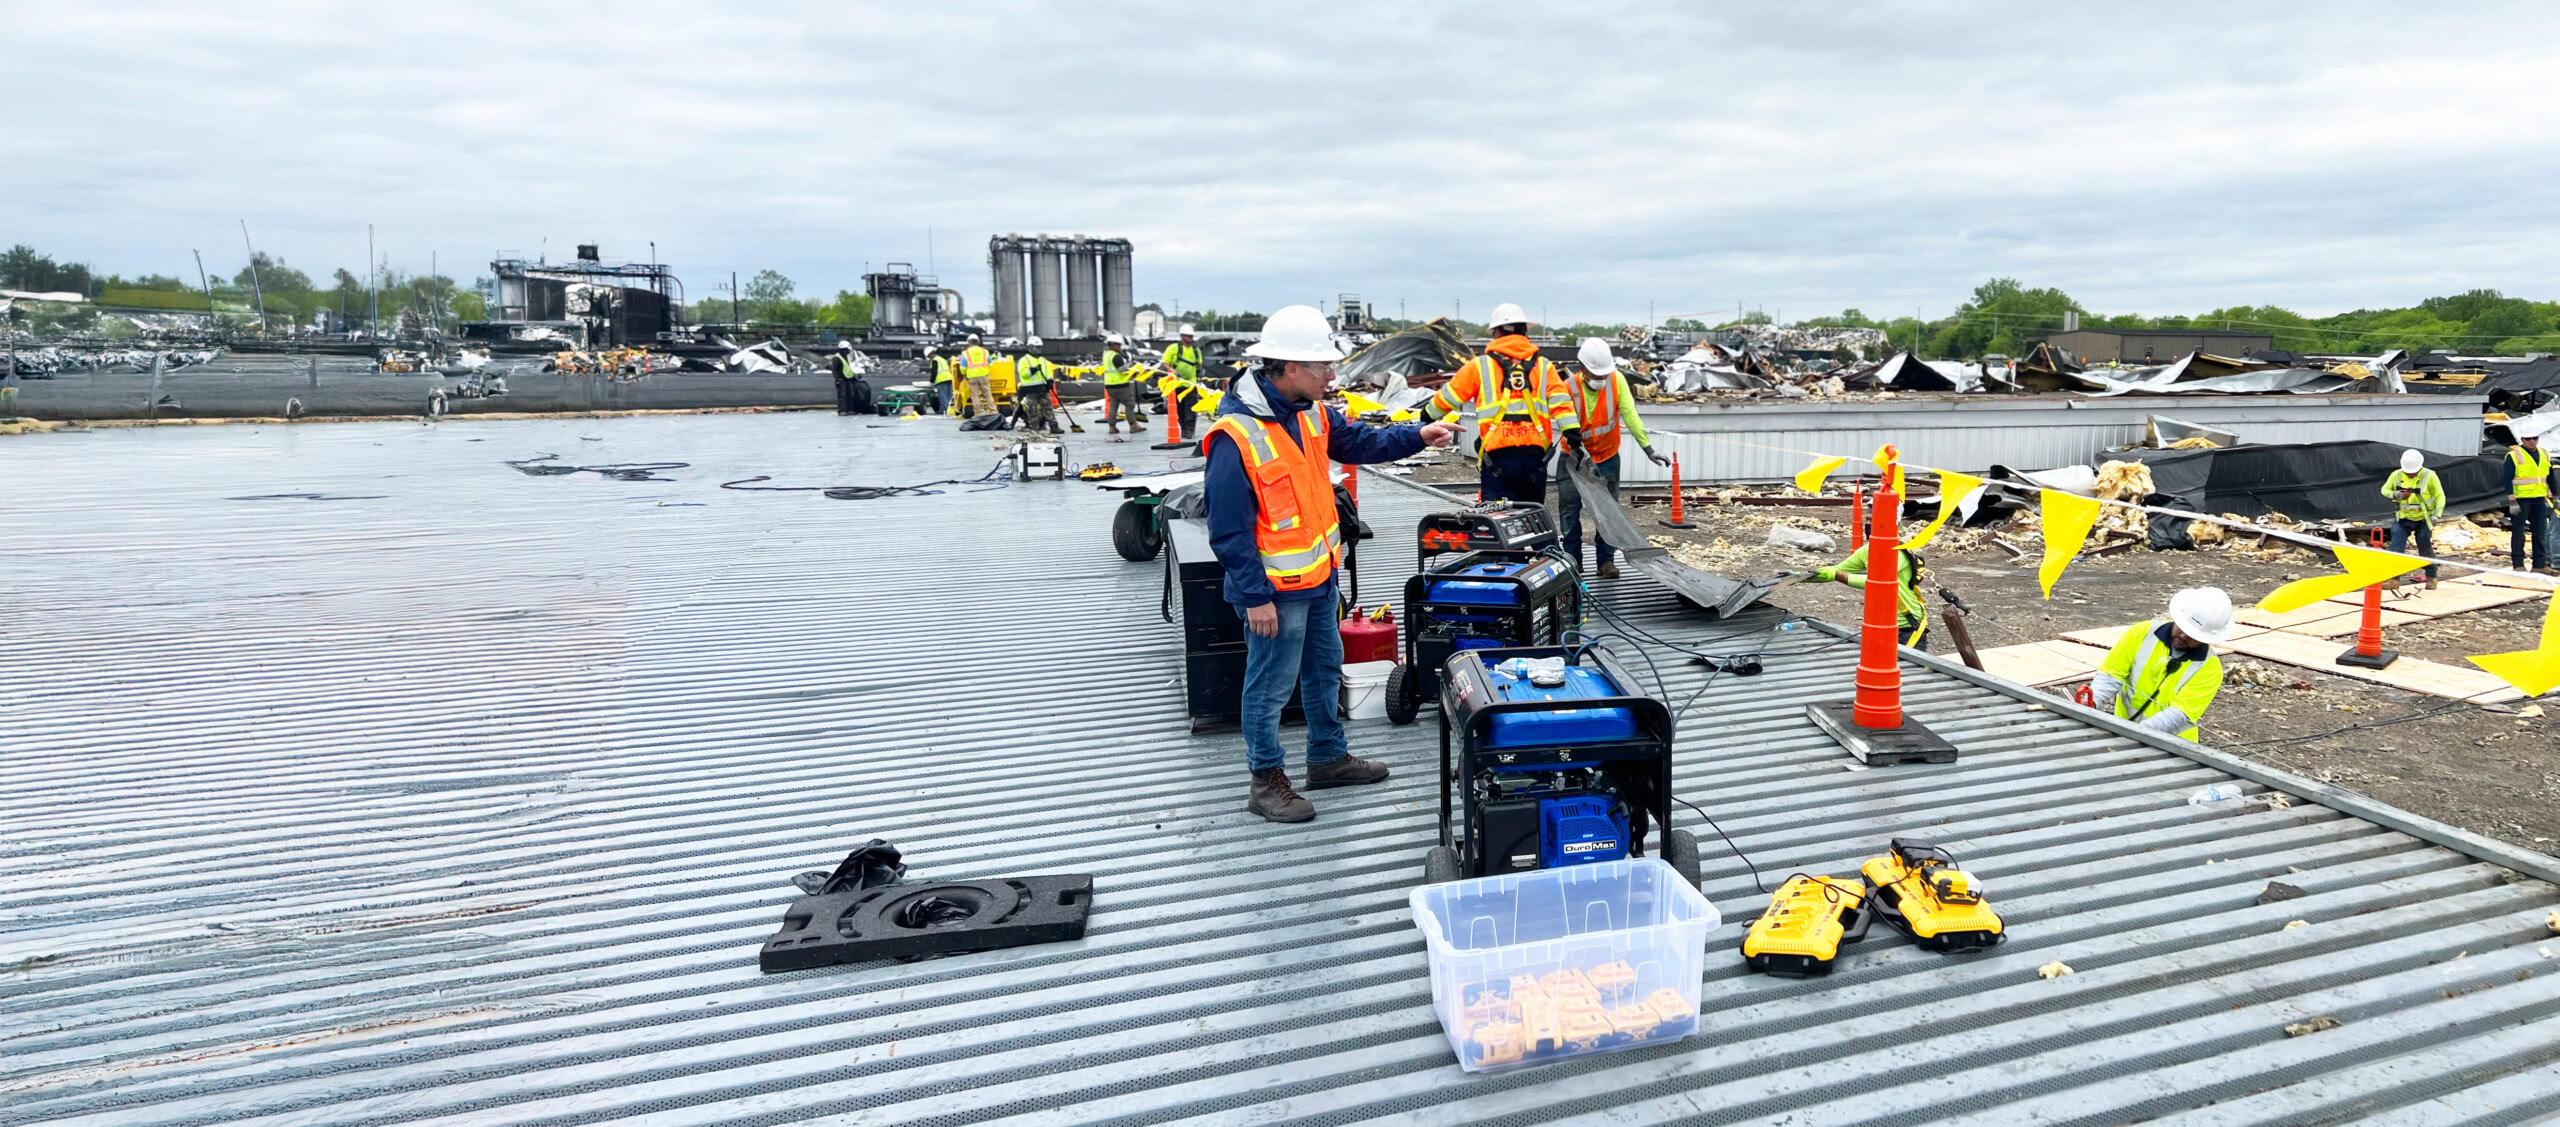 A group of construction workers in orange safety vests and white helmets are standing on a corrugated metal surface. Various tools and equipment are spread out around them. In the background, there is debris and partially constructed or demolished buildings.